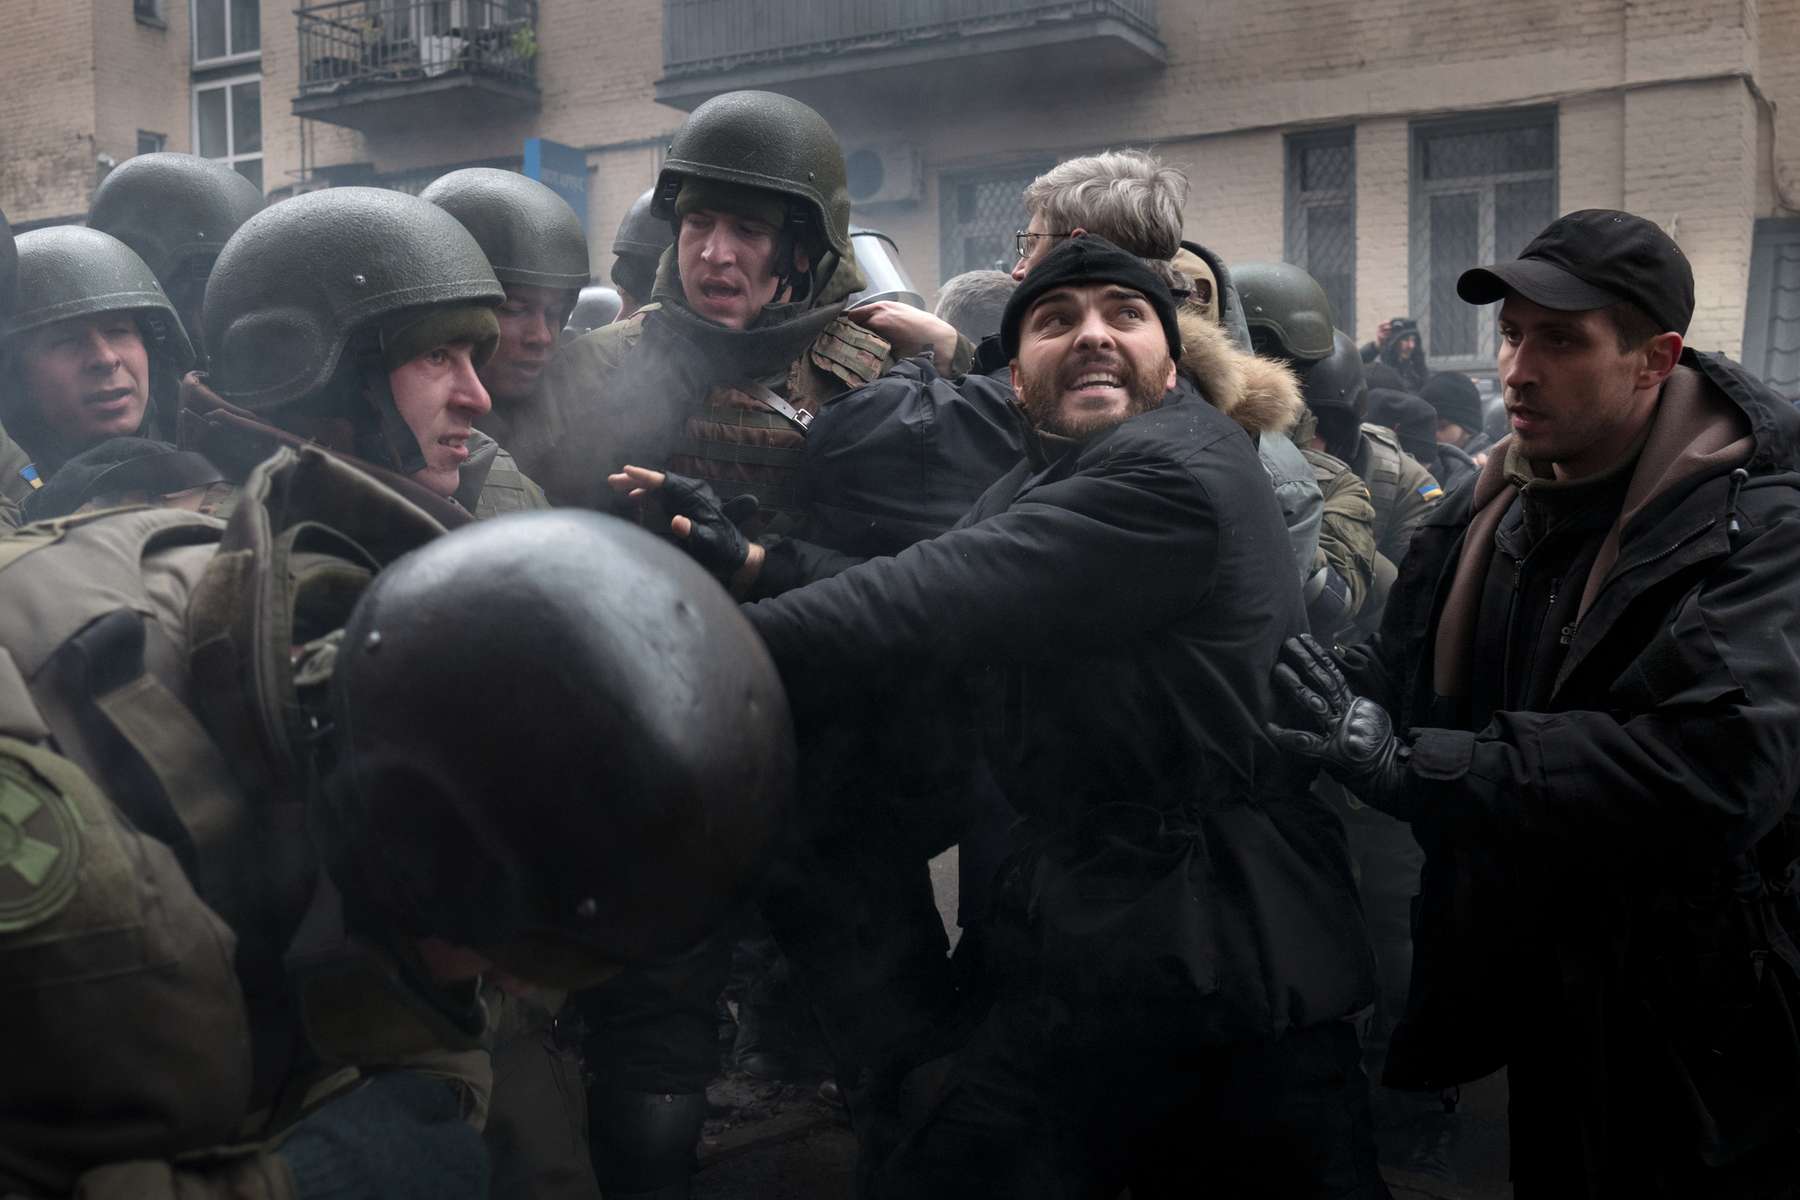 Supporters of former Georgian president clash with police as they attempts to block the police van in which he is transported after being arrested.Ukrainian security services on Tuesday arrested former Georgian president Mikheil Saakashvili after he climbed onto the roof of his apartment building and addressed supporters during a police raid. The Ukrainian Security Service (SBU) said Saakashvili had been arrested on charges of assisting criminal organizations.Saakashvili left Georgia in 2013 after serving as president for nearly a decade, and later was appointed governor of Ukraine’s Odessa region. But he quit in 2016, complaining that his efforts to root out corruption were suffering from official obstruction.His Ukrainian citizenship was revoked this year while he was out of the country, but he returned in September after supporters broke through a police line at the Polish border.